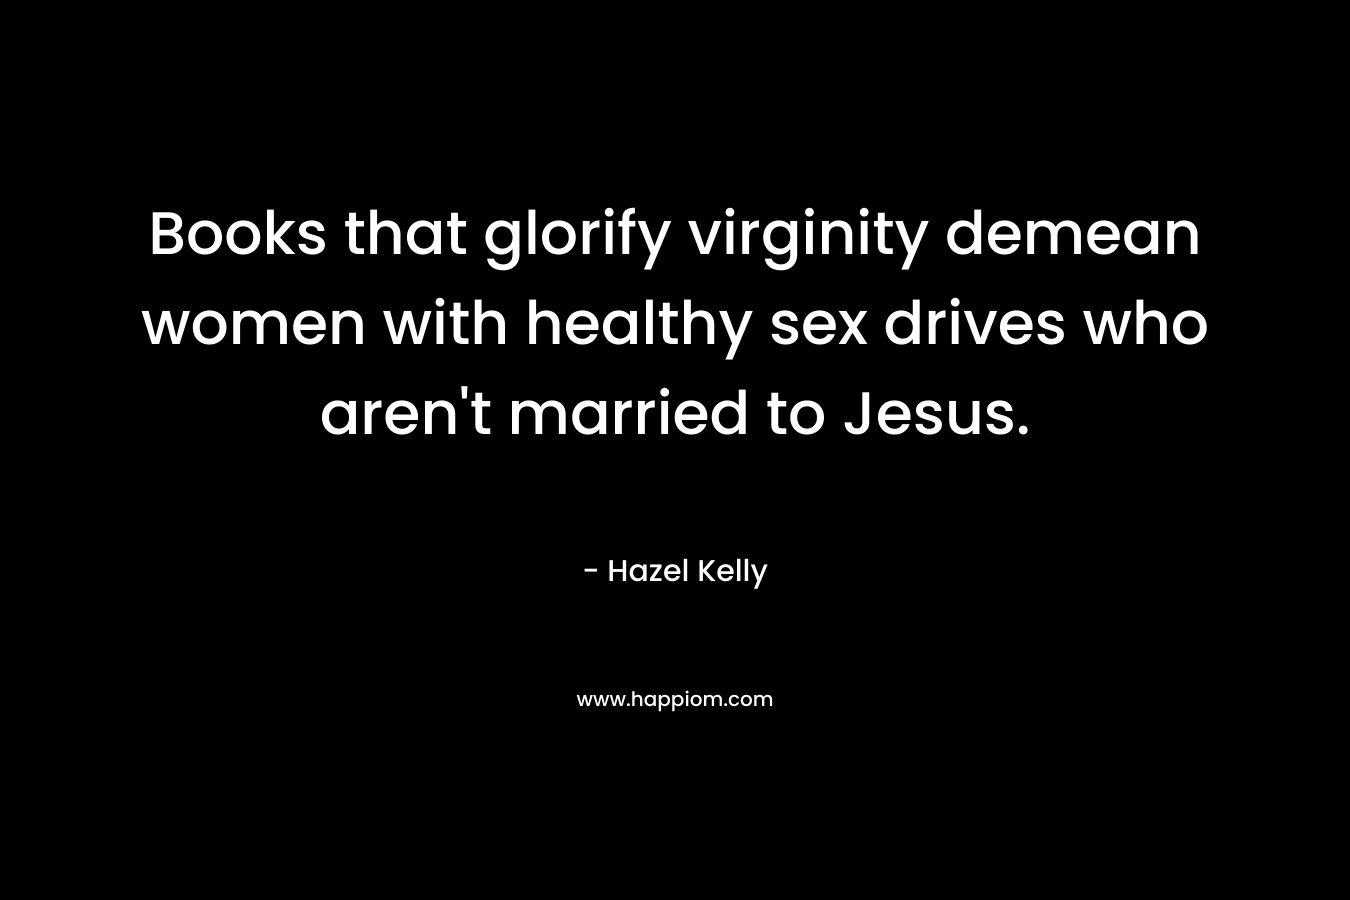 Books that glorify virginity demean women with healthy sex drives who aren't married to Jesus.